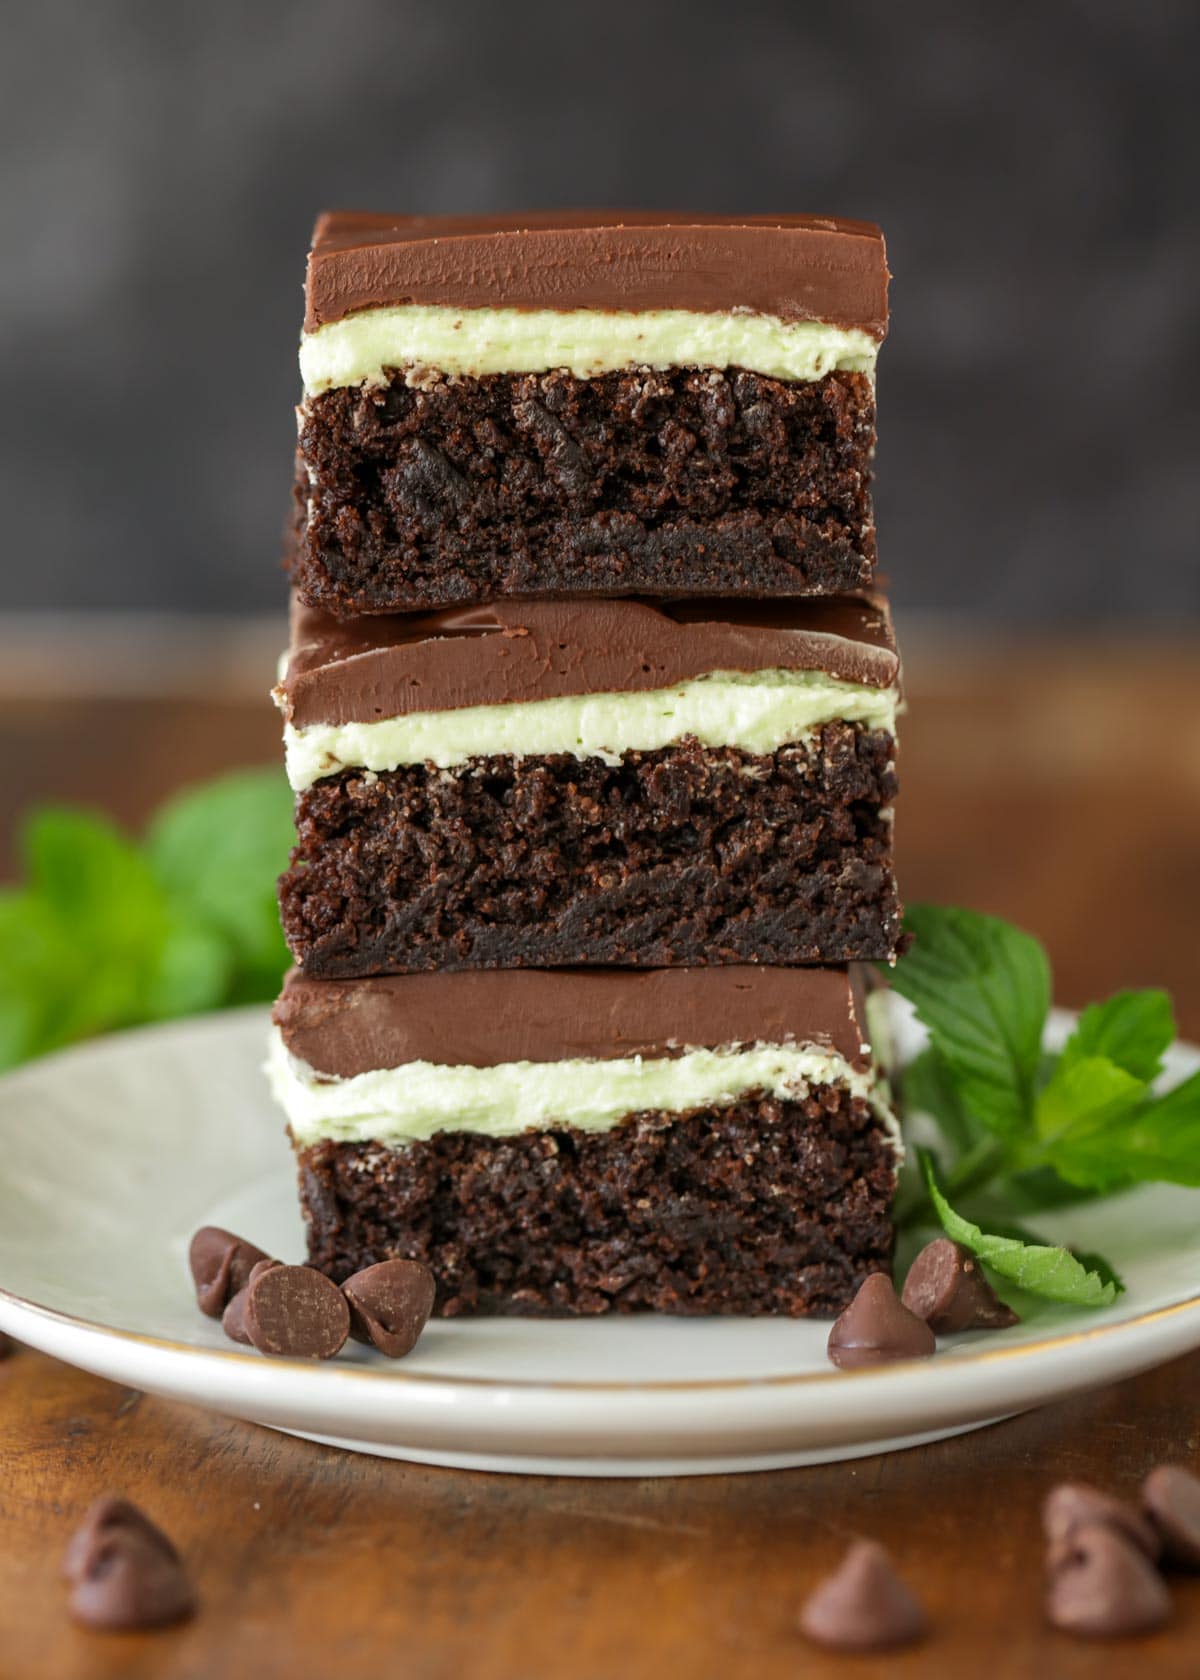 Mint brownies recipe stacked on plate